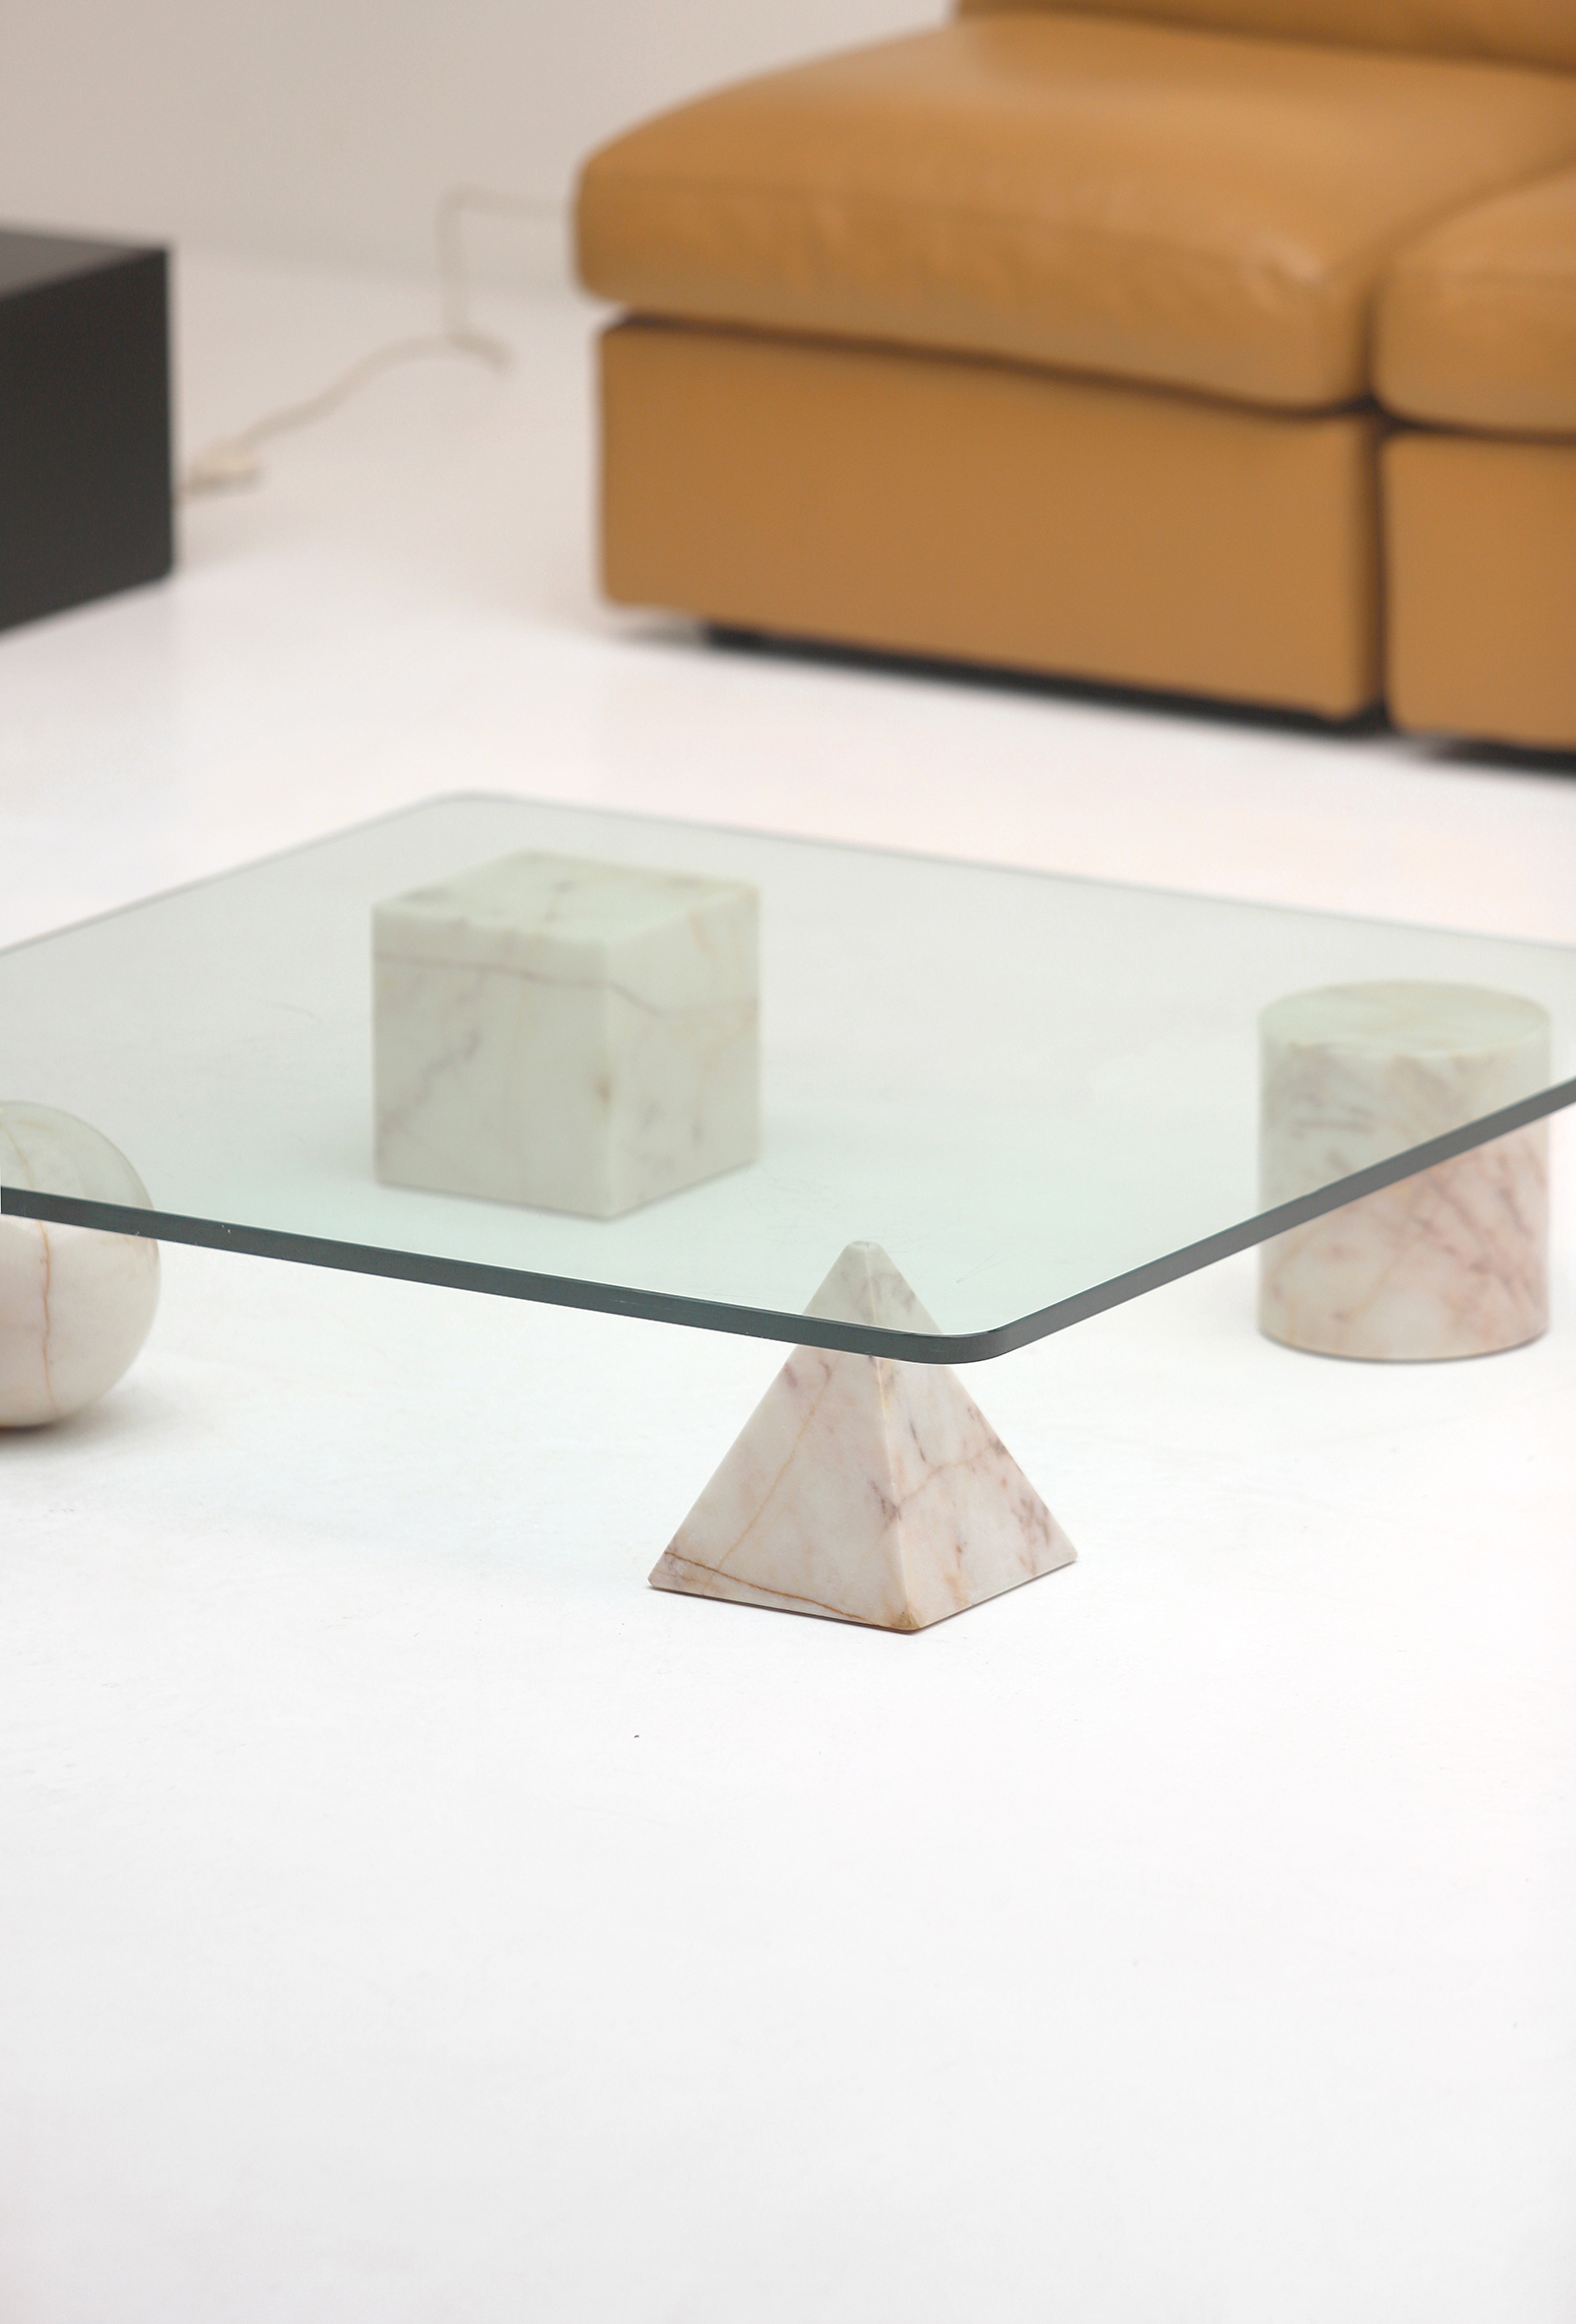 'Metaphora' Coffee Table by Lella and Massimo Vignelli 1979image 2